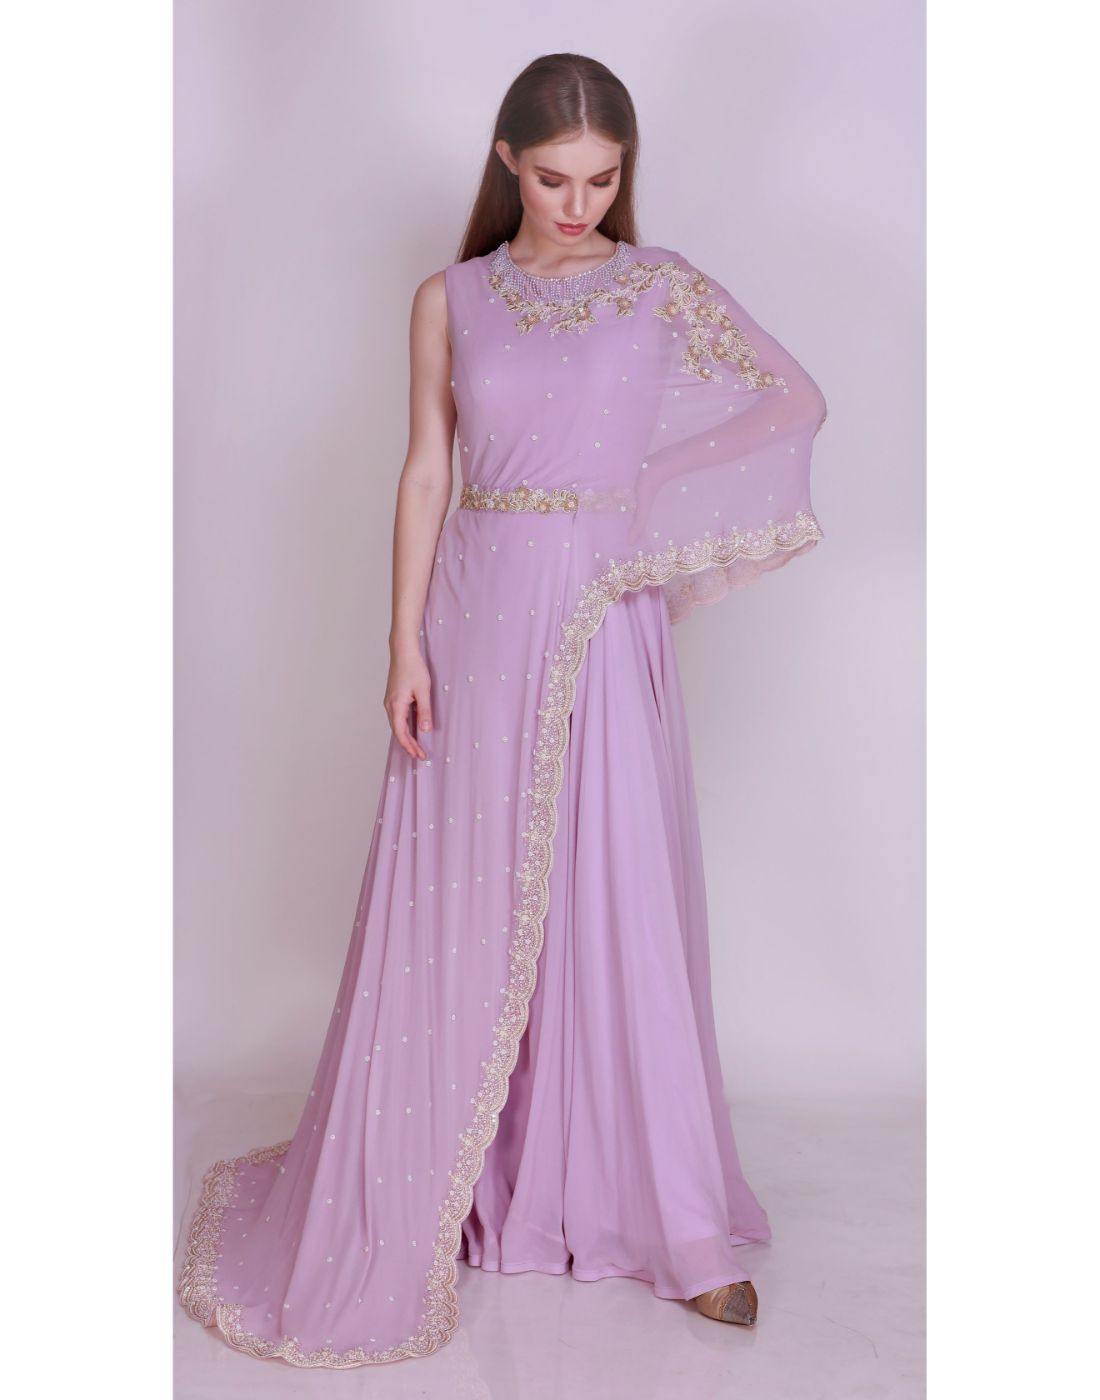 RUCHED CHIFFON EVENING GOWN WITH ATTACHED SHORT CAPE - XS | Gowns, Cape gown,  Chiffon